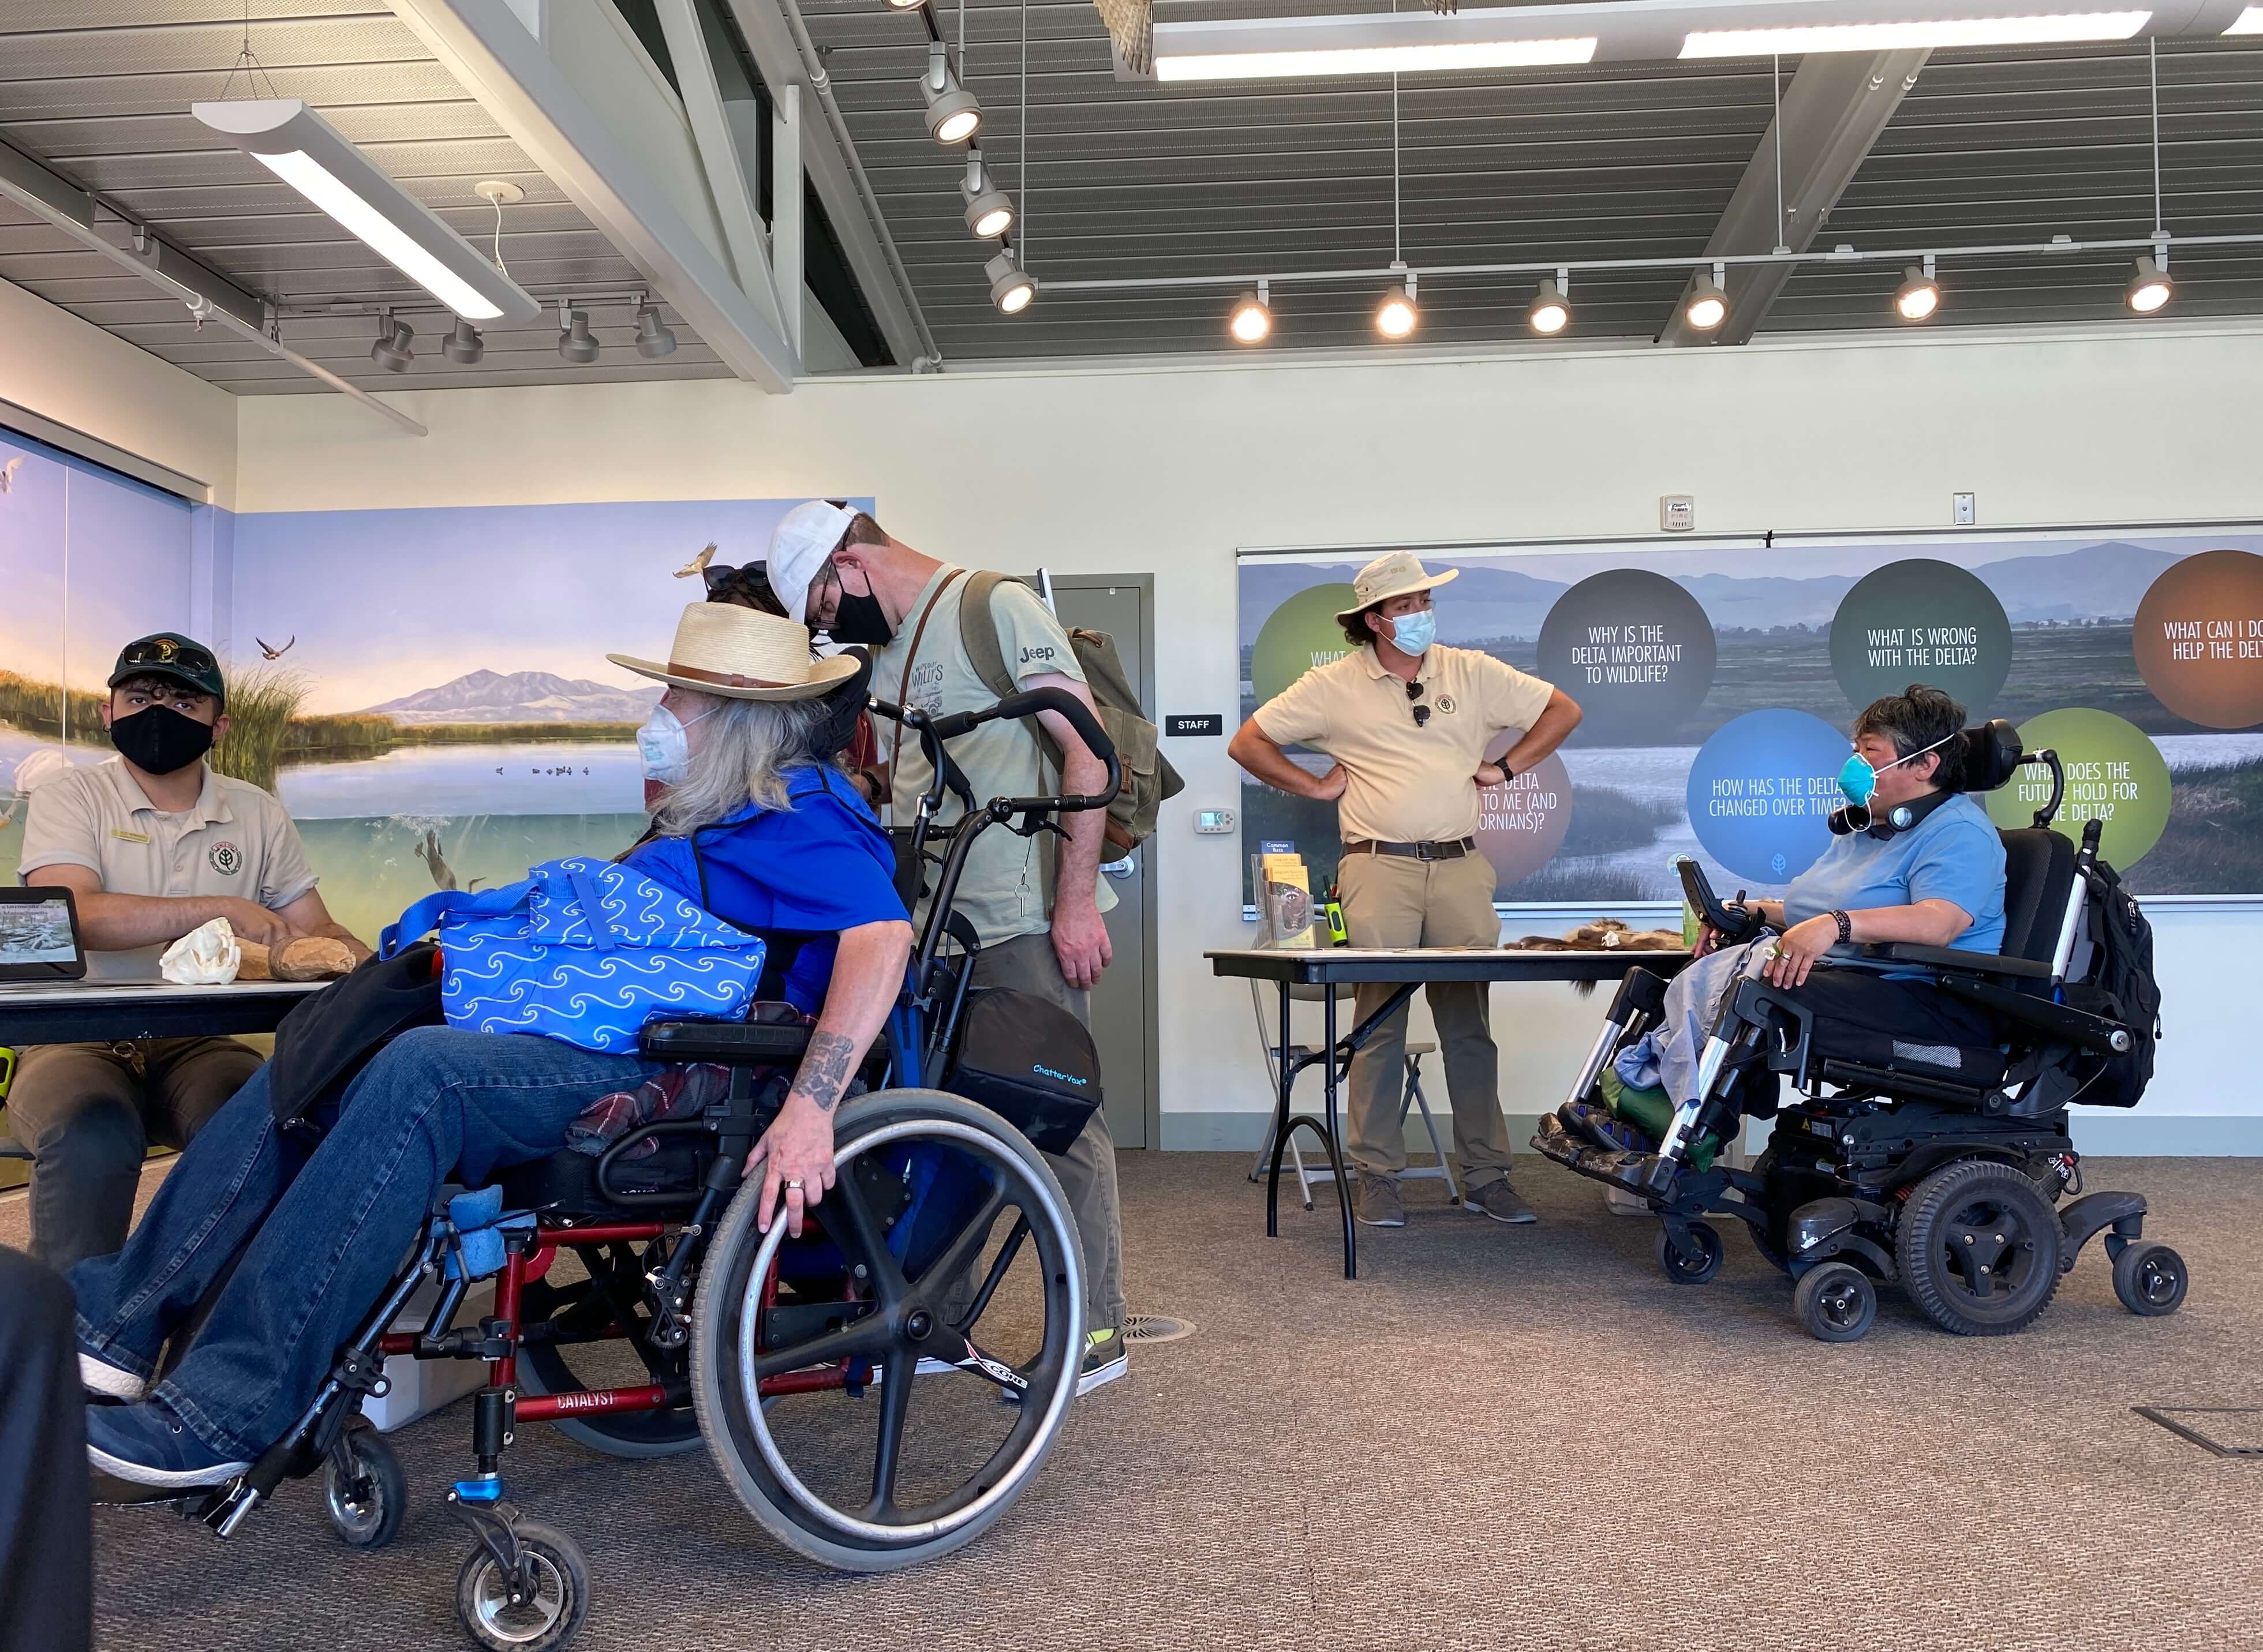 Visitor center: Park staff behind tables set with pelts and objects found in the park talk with visitors in wheelchairs